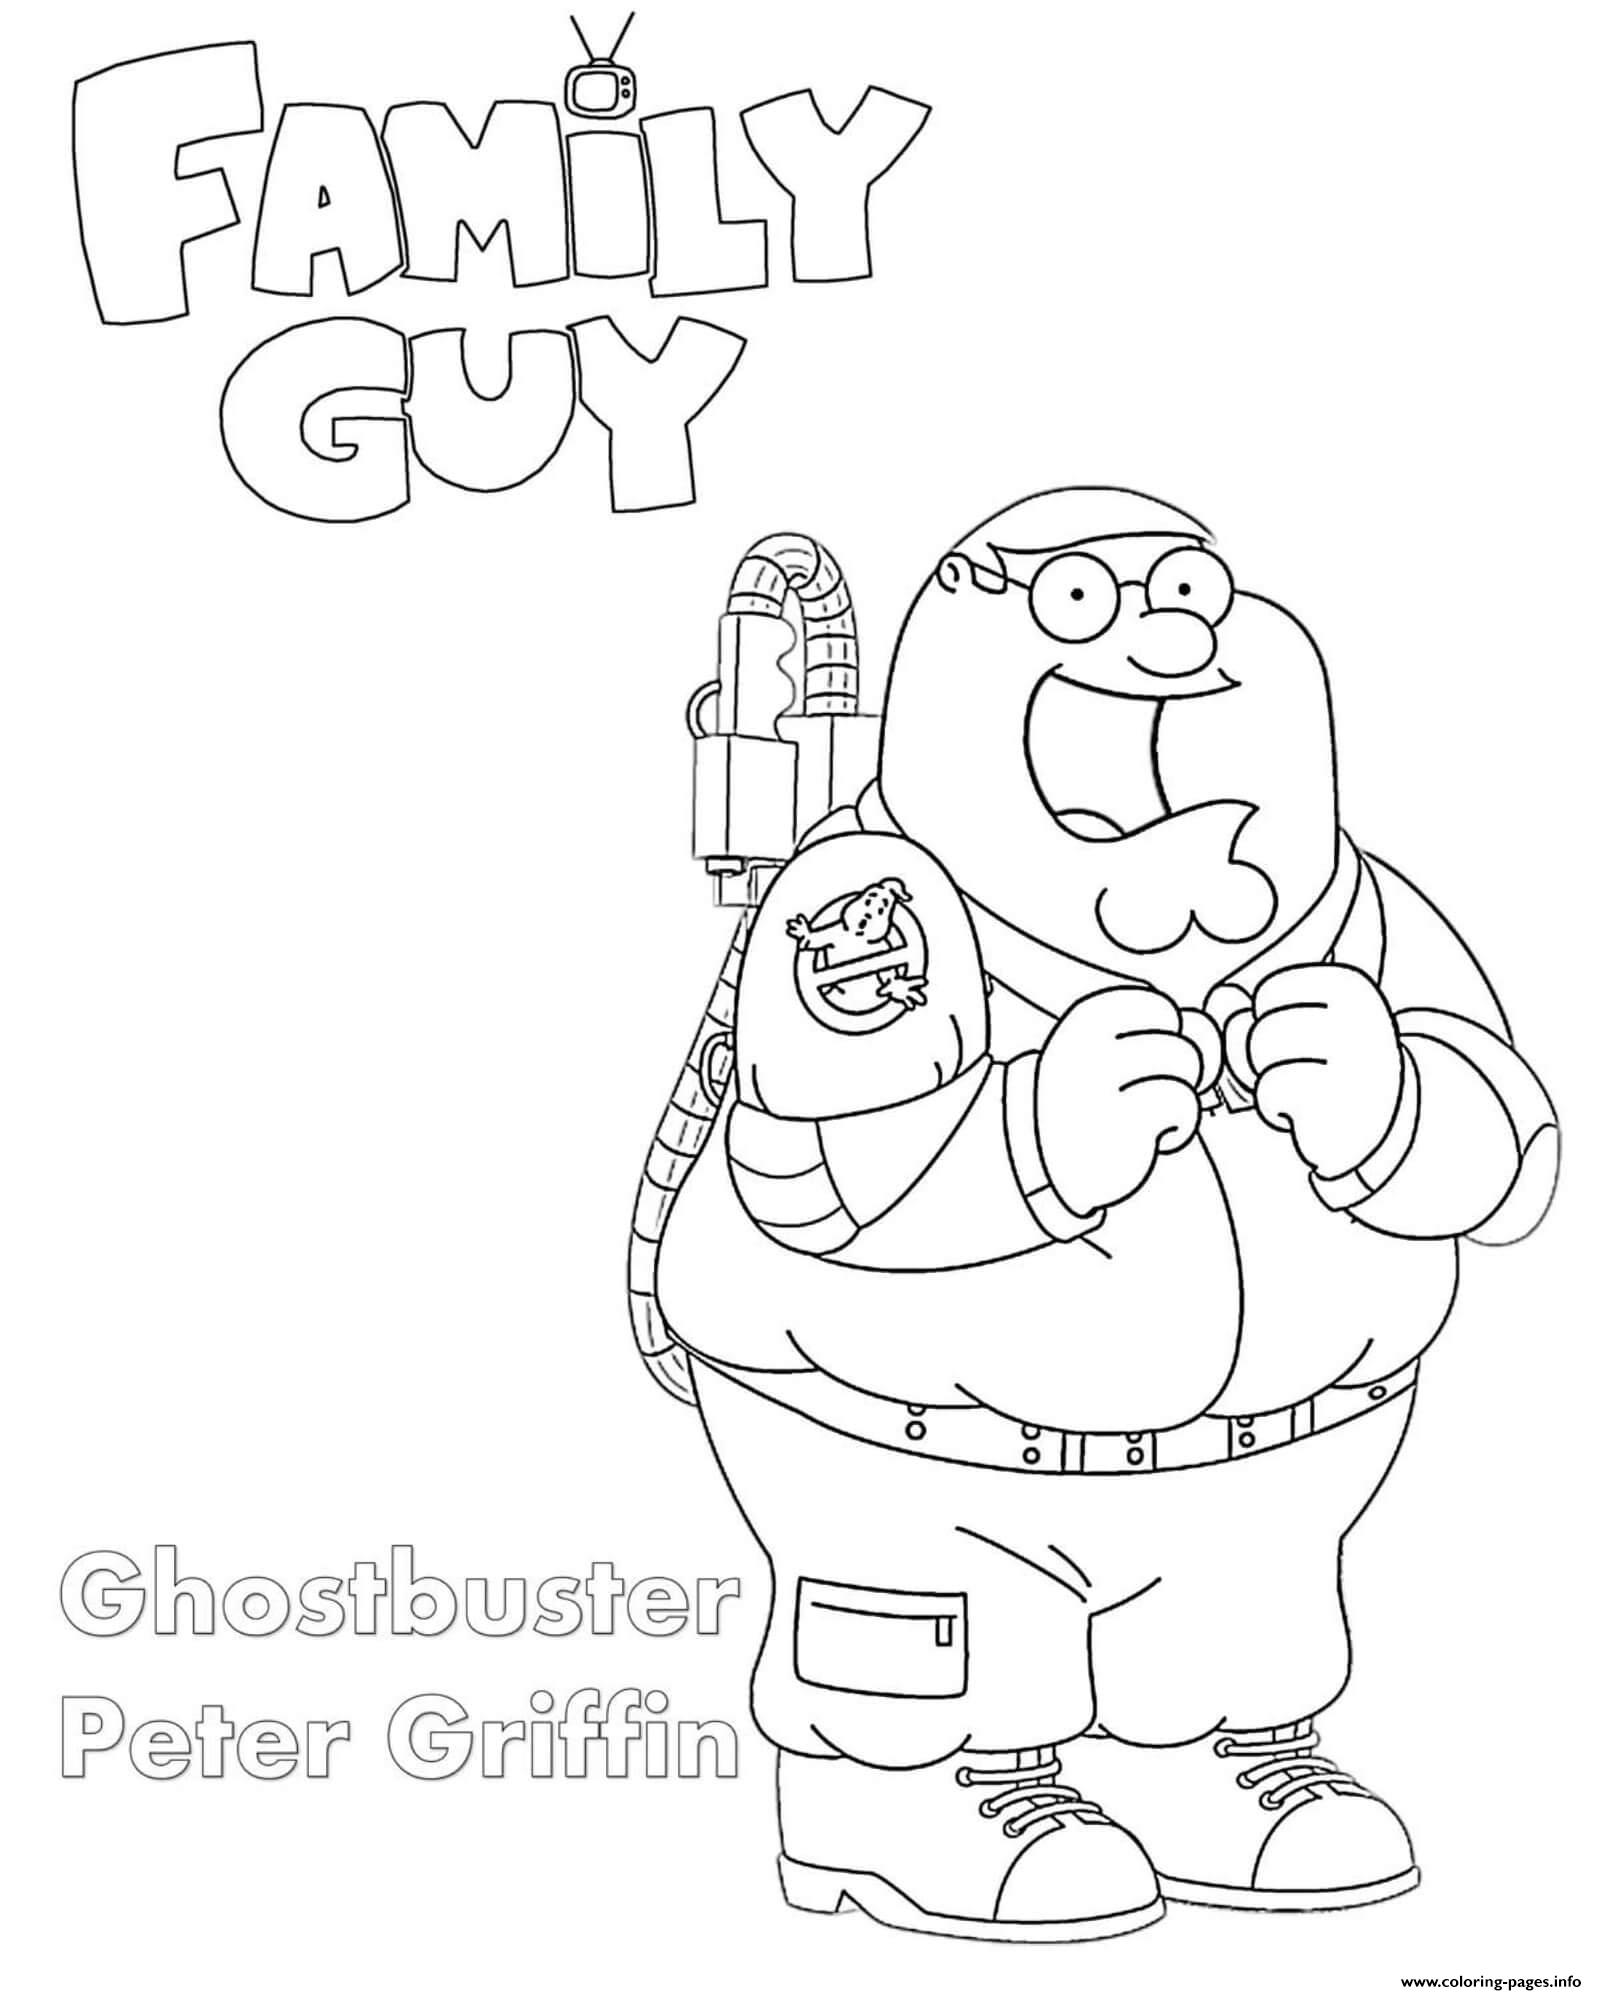 Family Guy Ghostbuster Peter coloring